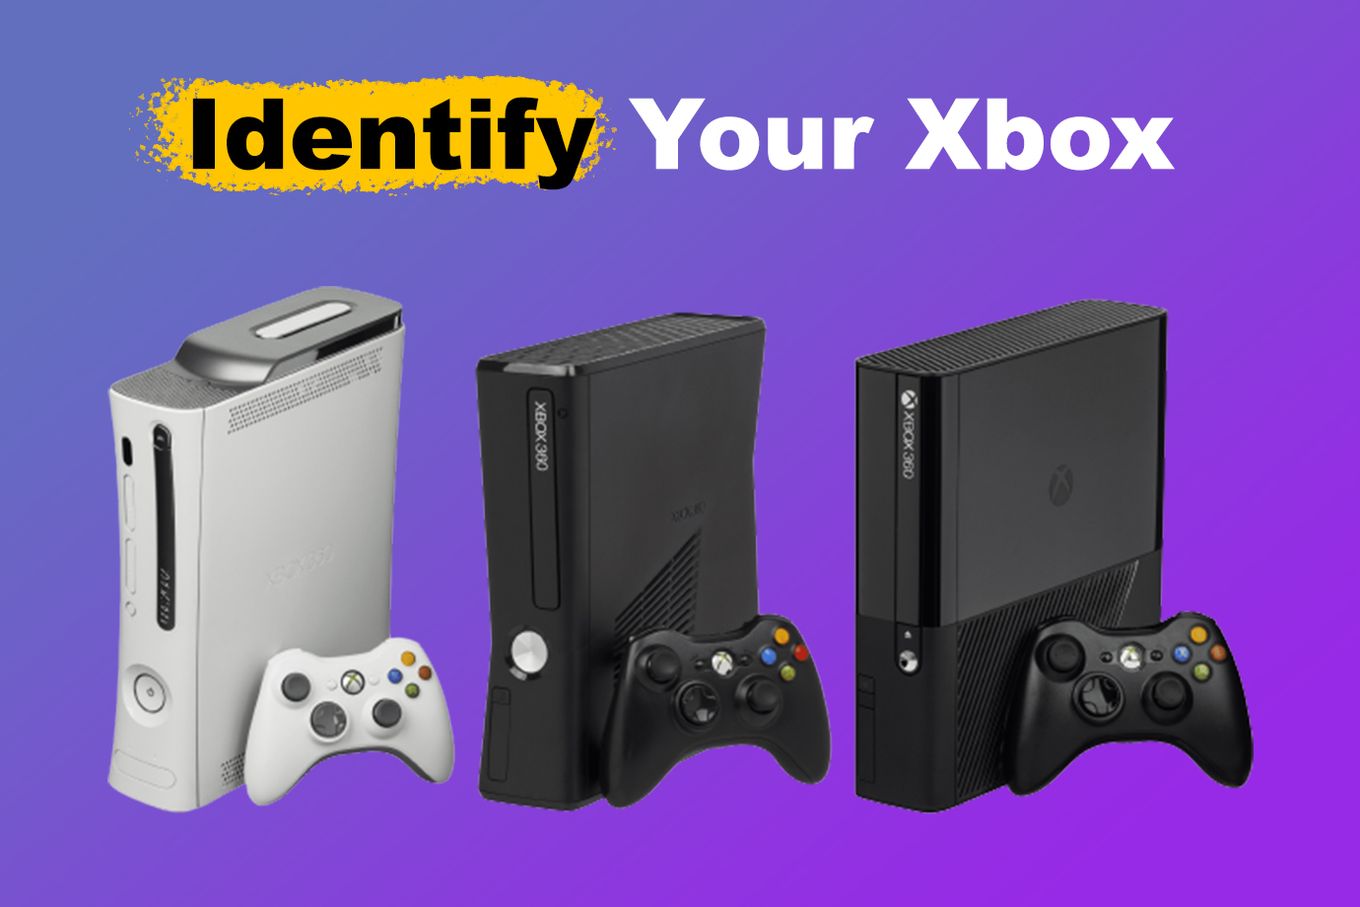 What Xbox Do You Have?